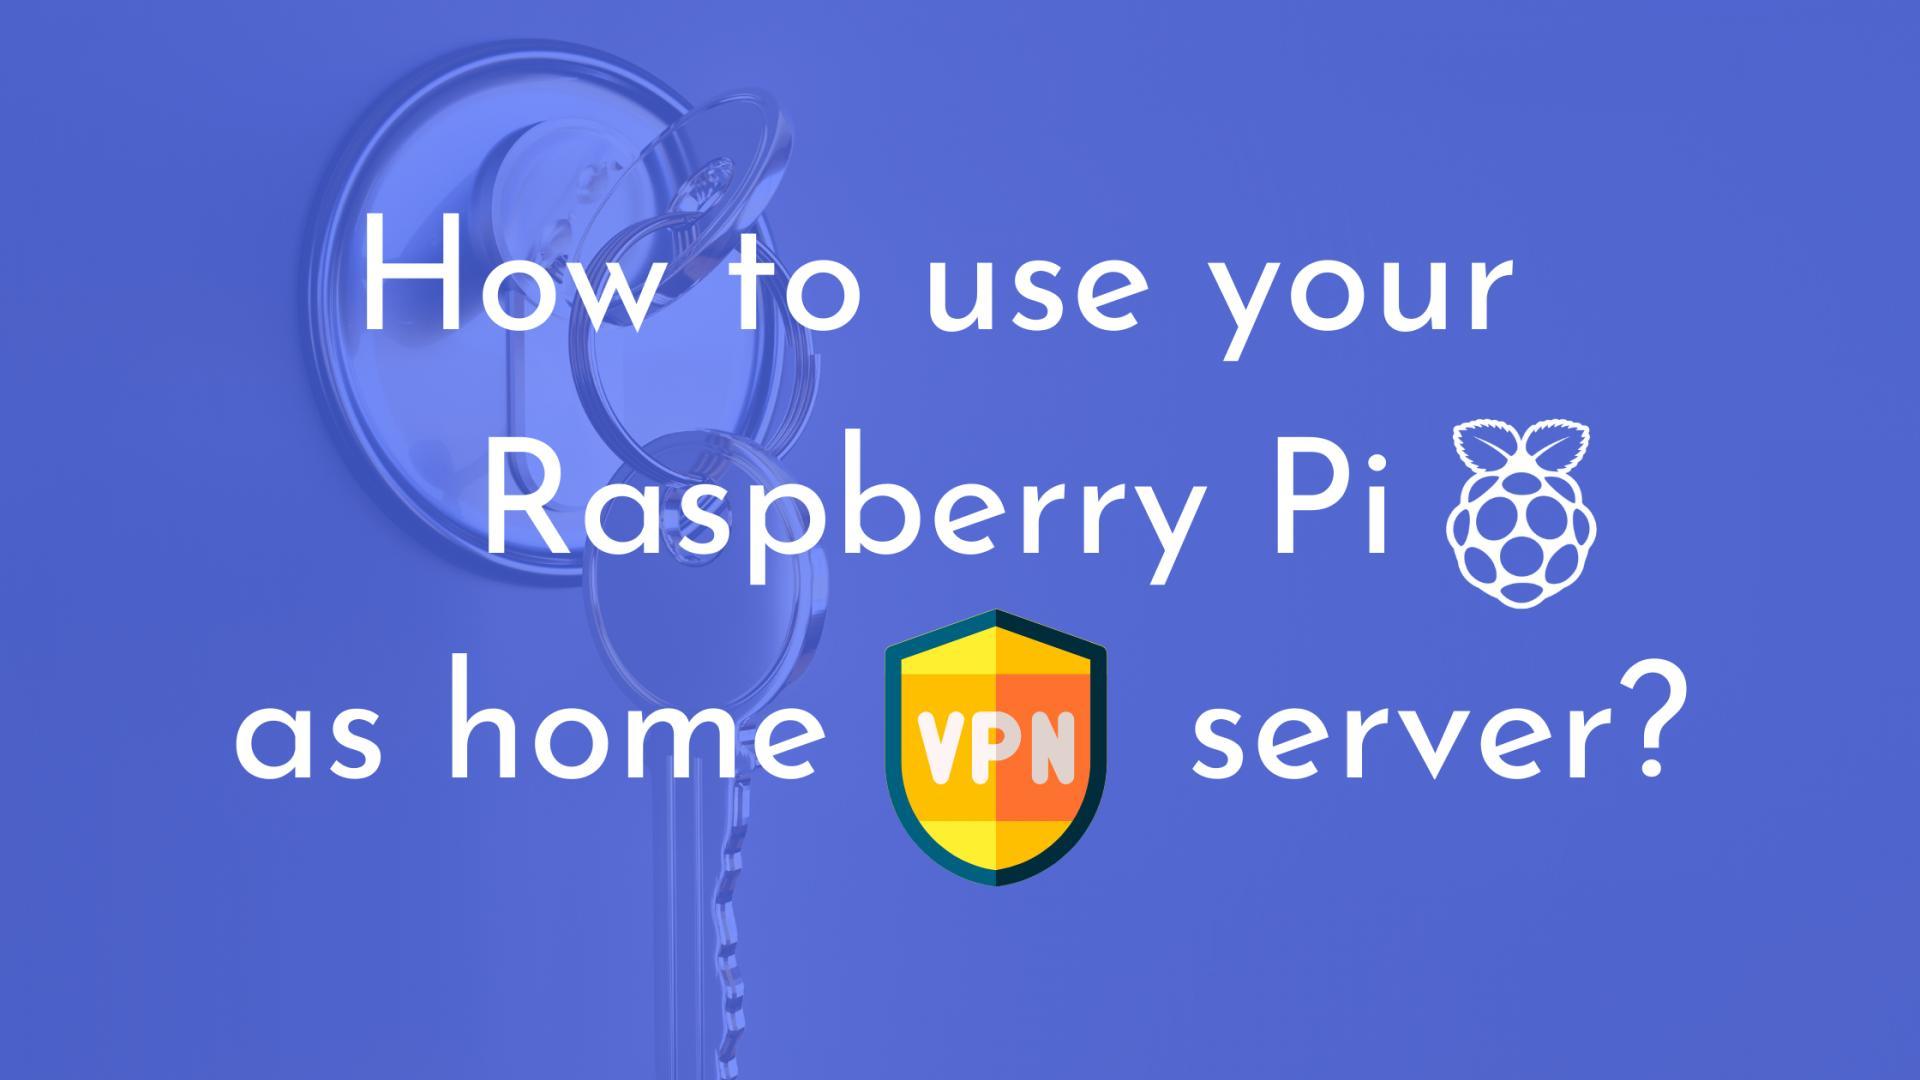 How to use your Raspberry Pi as home VPN server?